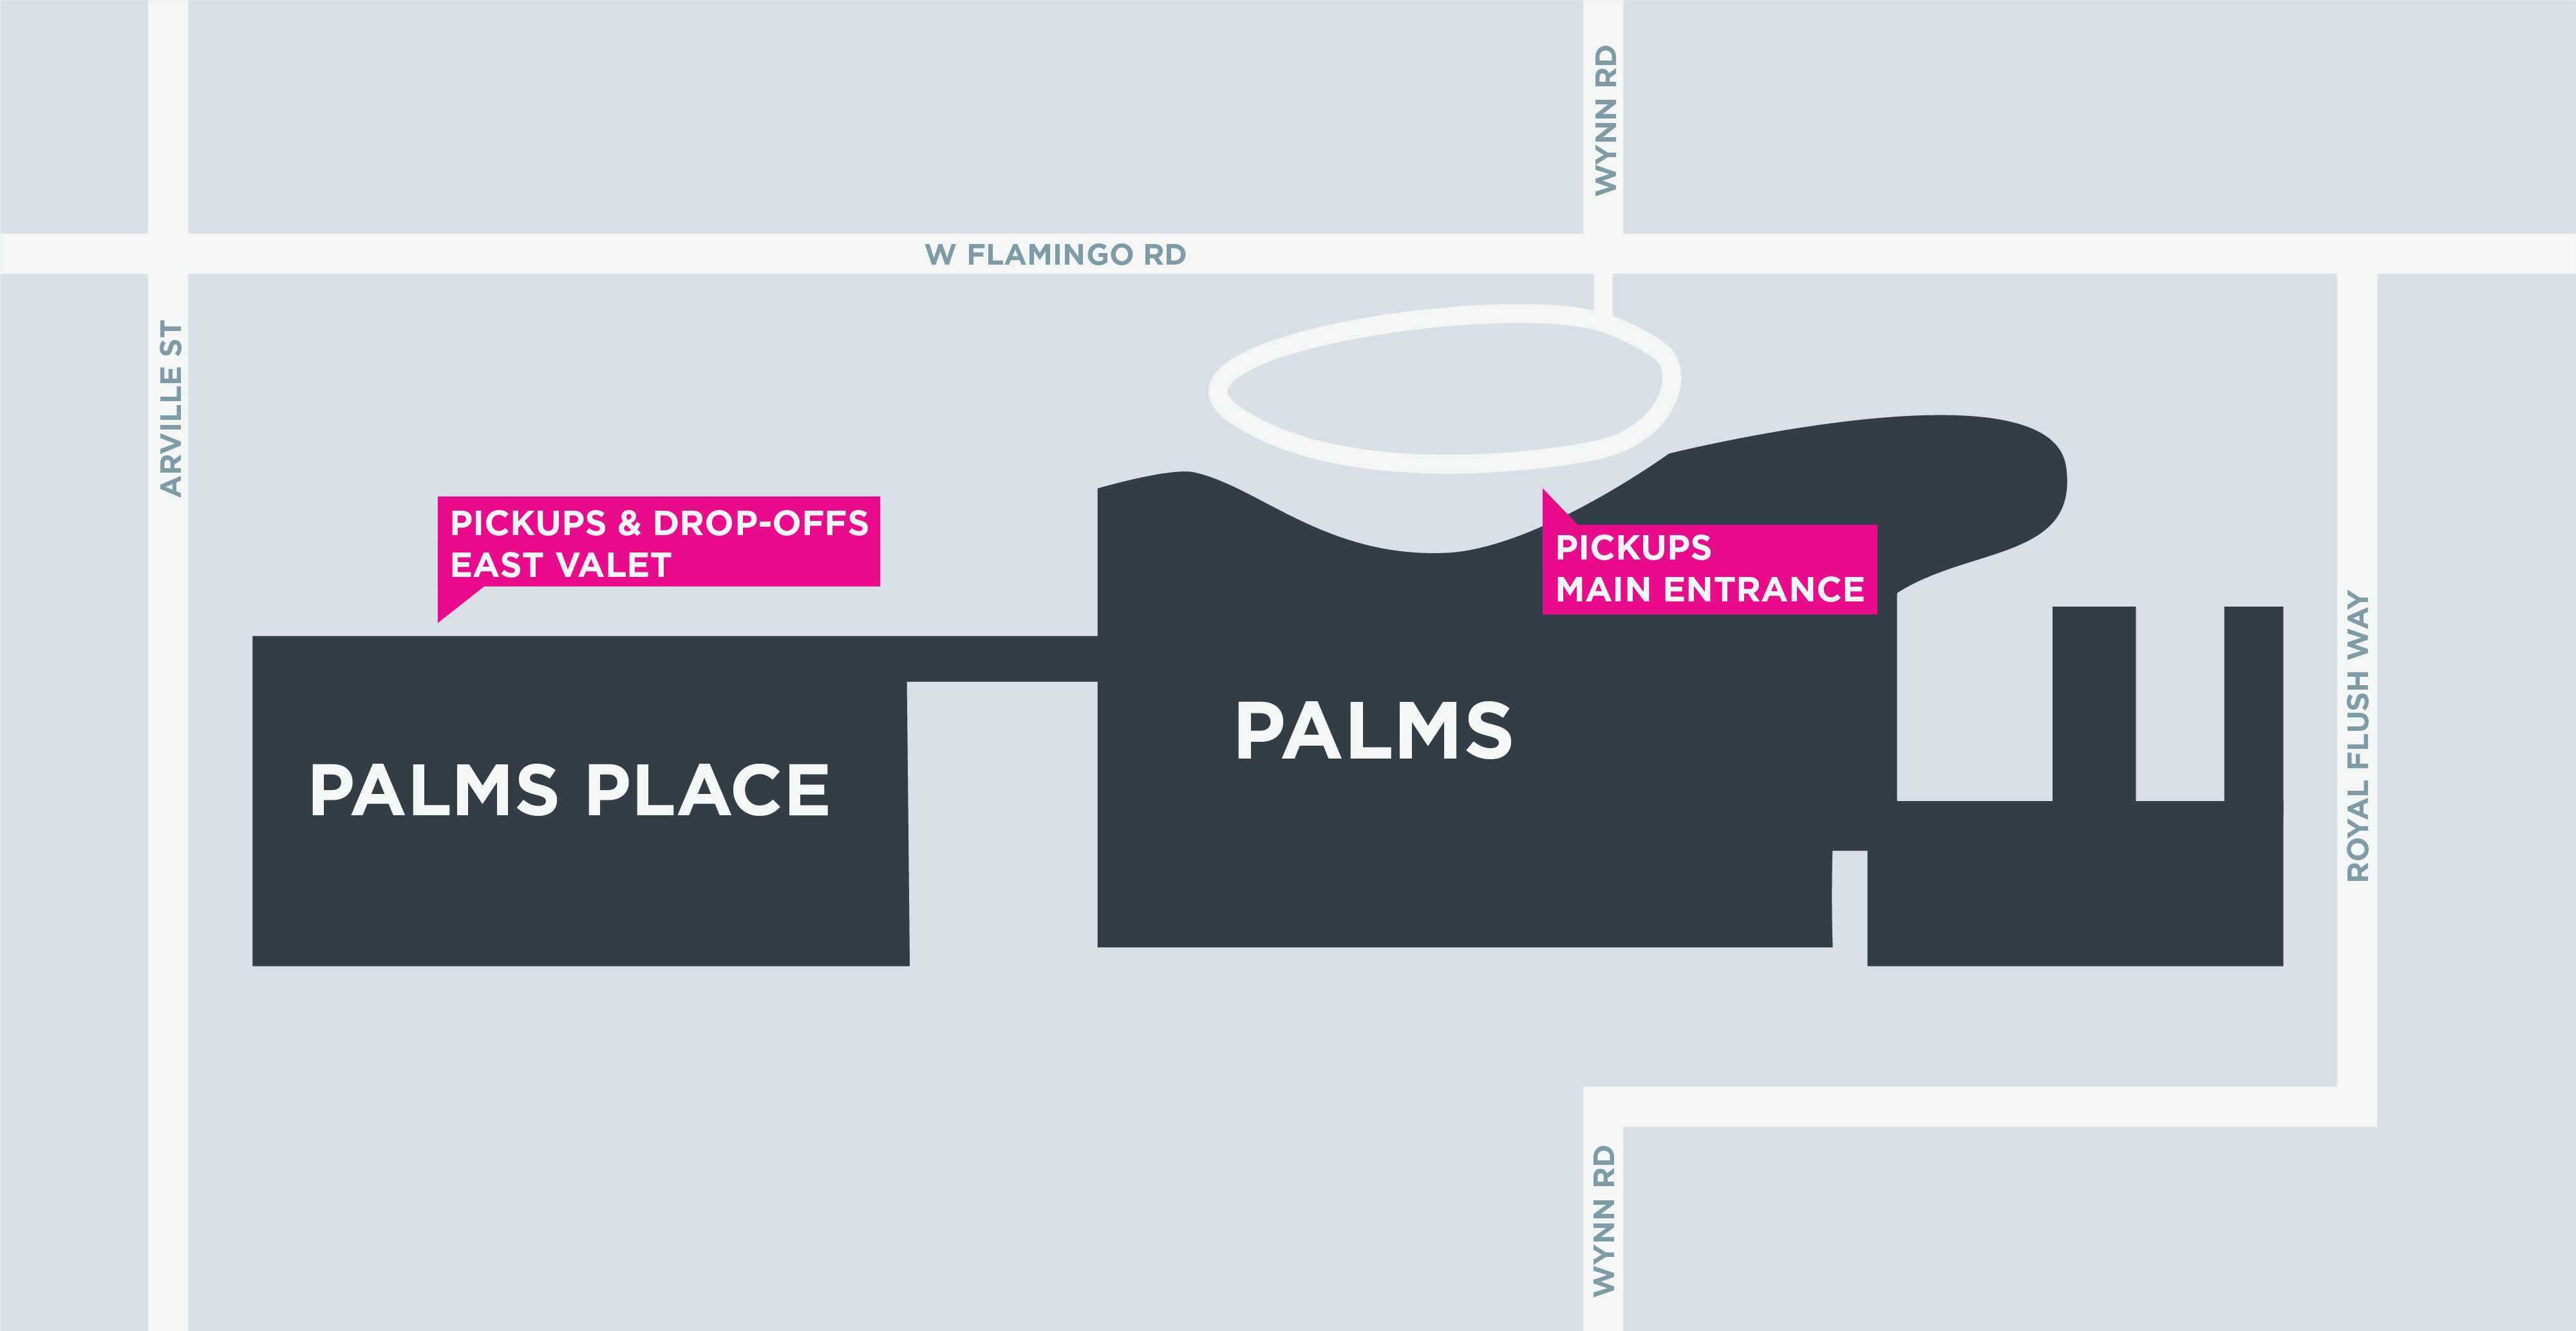 Map of pickup and drop-off areas at the Palms and Palms Place in Las Vegas.